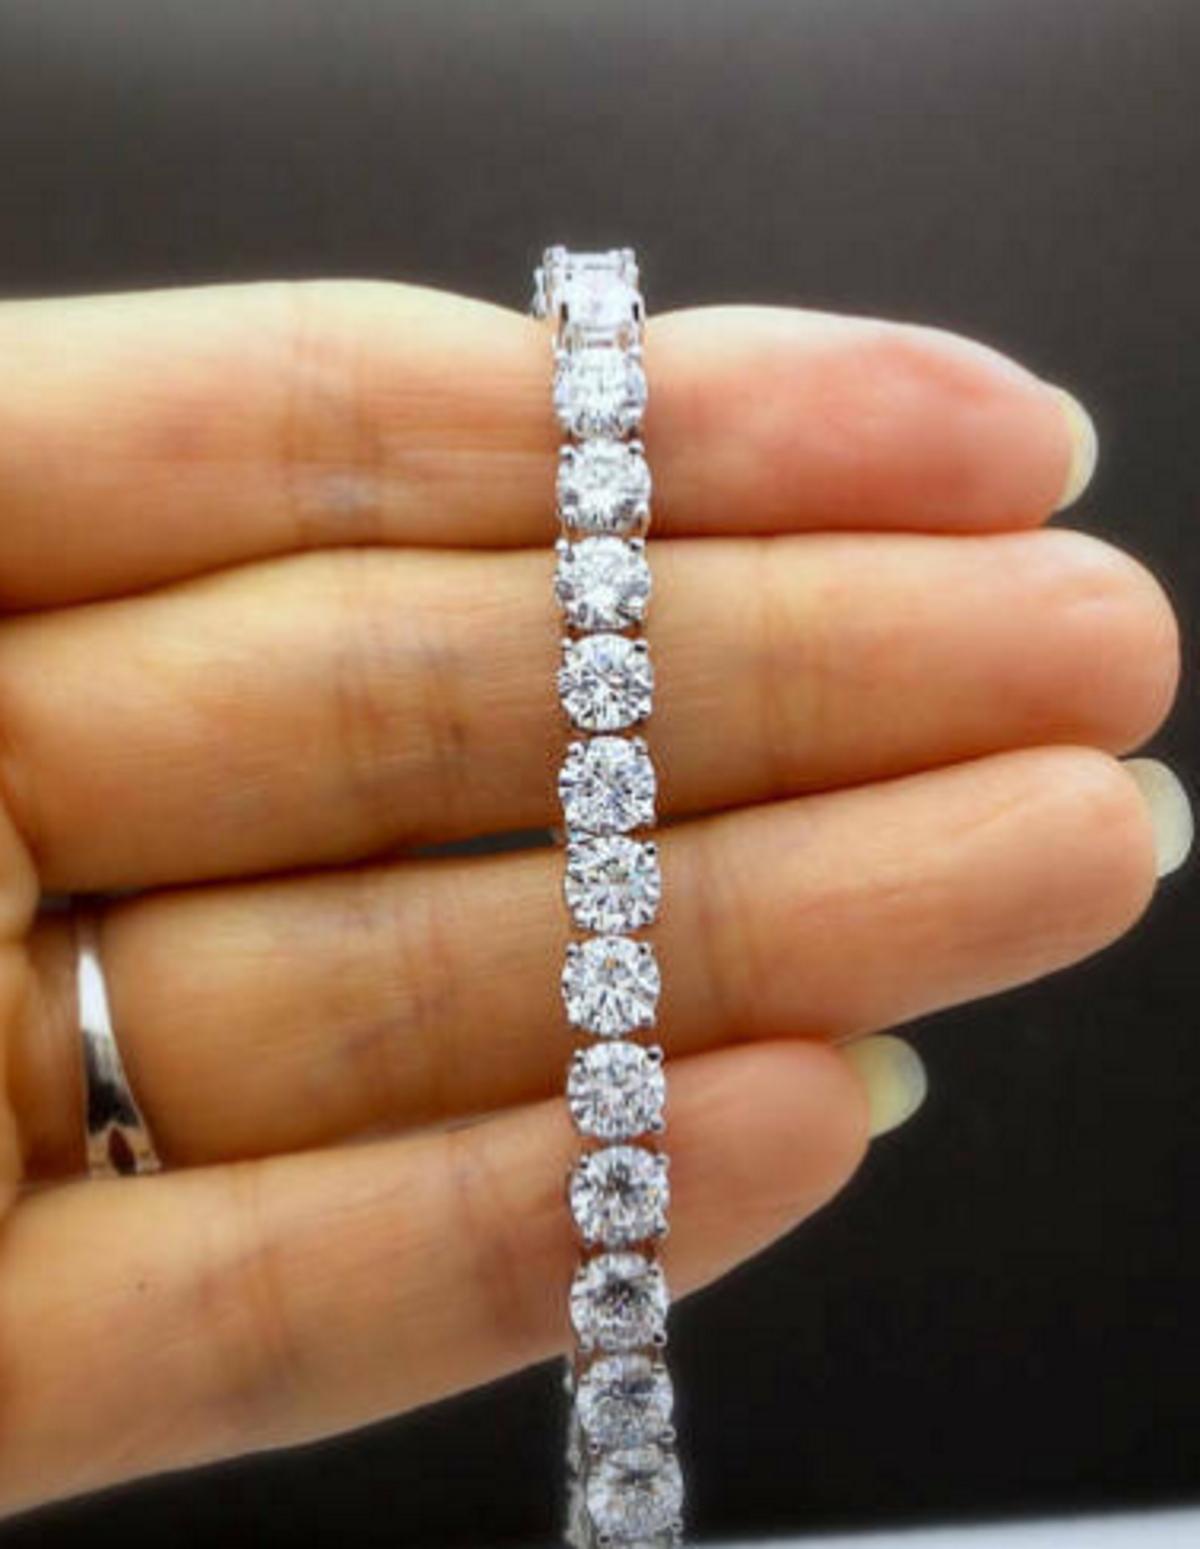 This gorgeous necklace will simply take your breath away! It features a 94 natural round brilliant cut diamonds. These sparkling diamonds conservatively grade as G/H VS/ in quality. The diamonds are set in a 18 carat white gold riviera or tennis